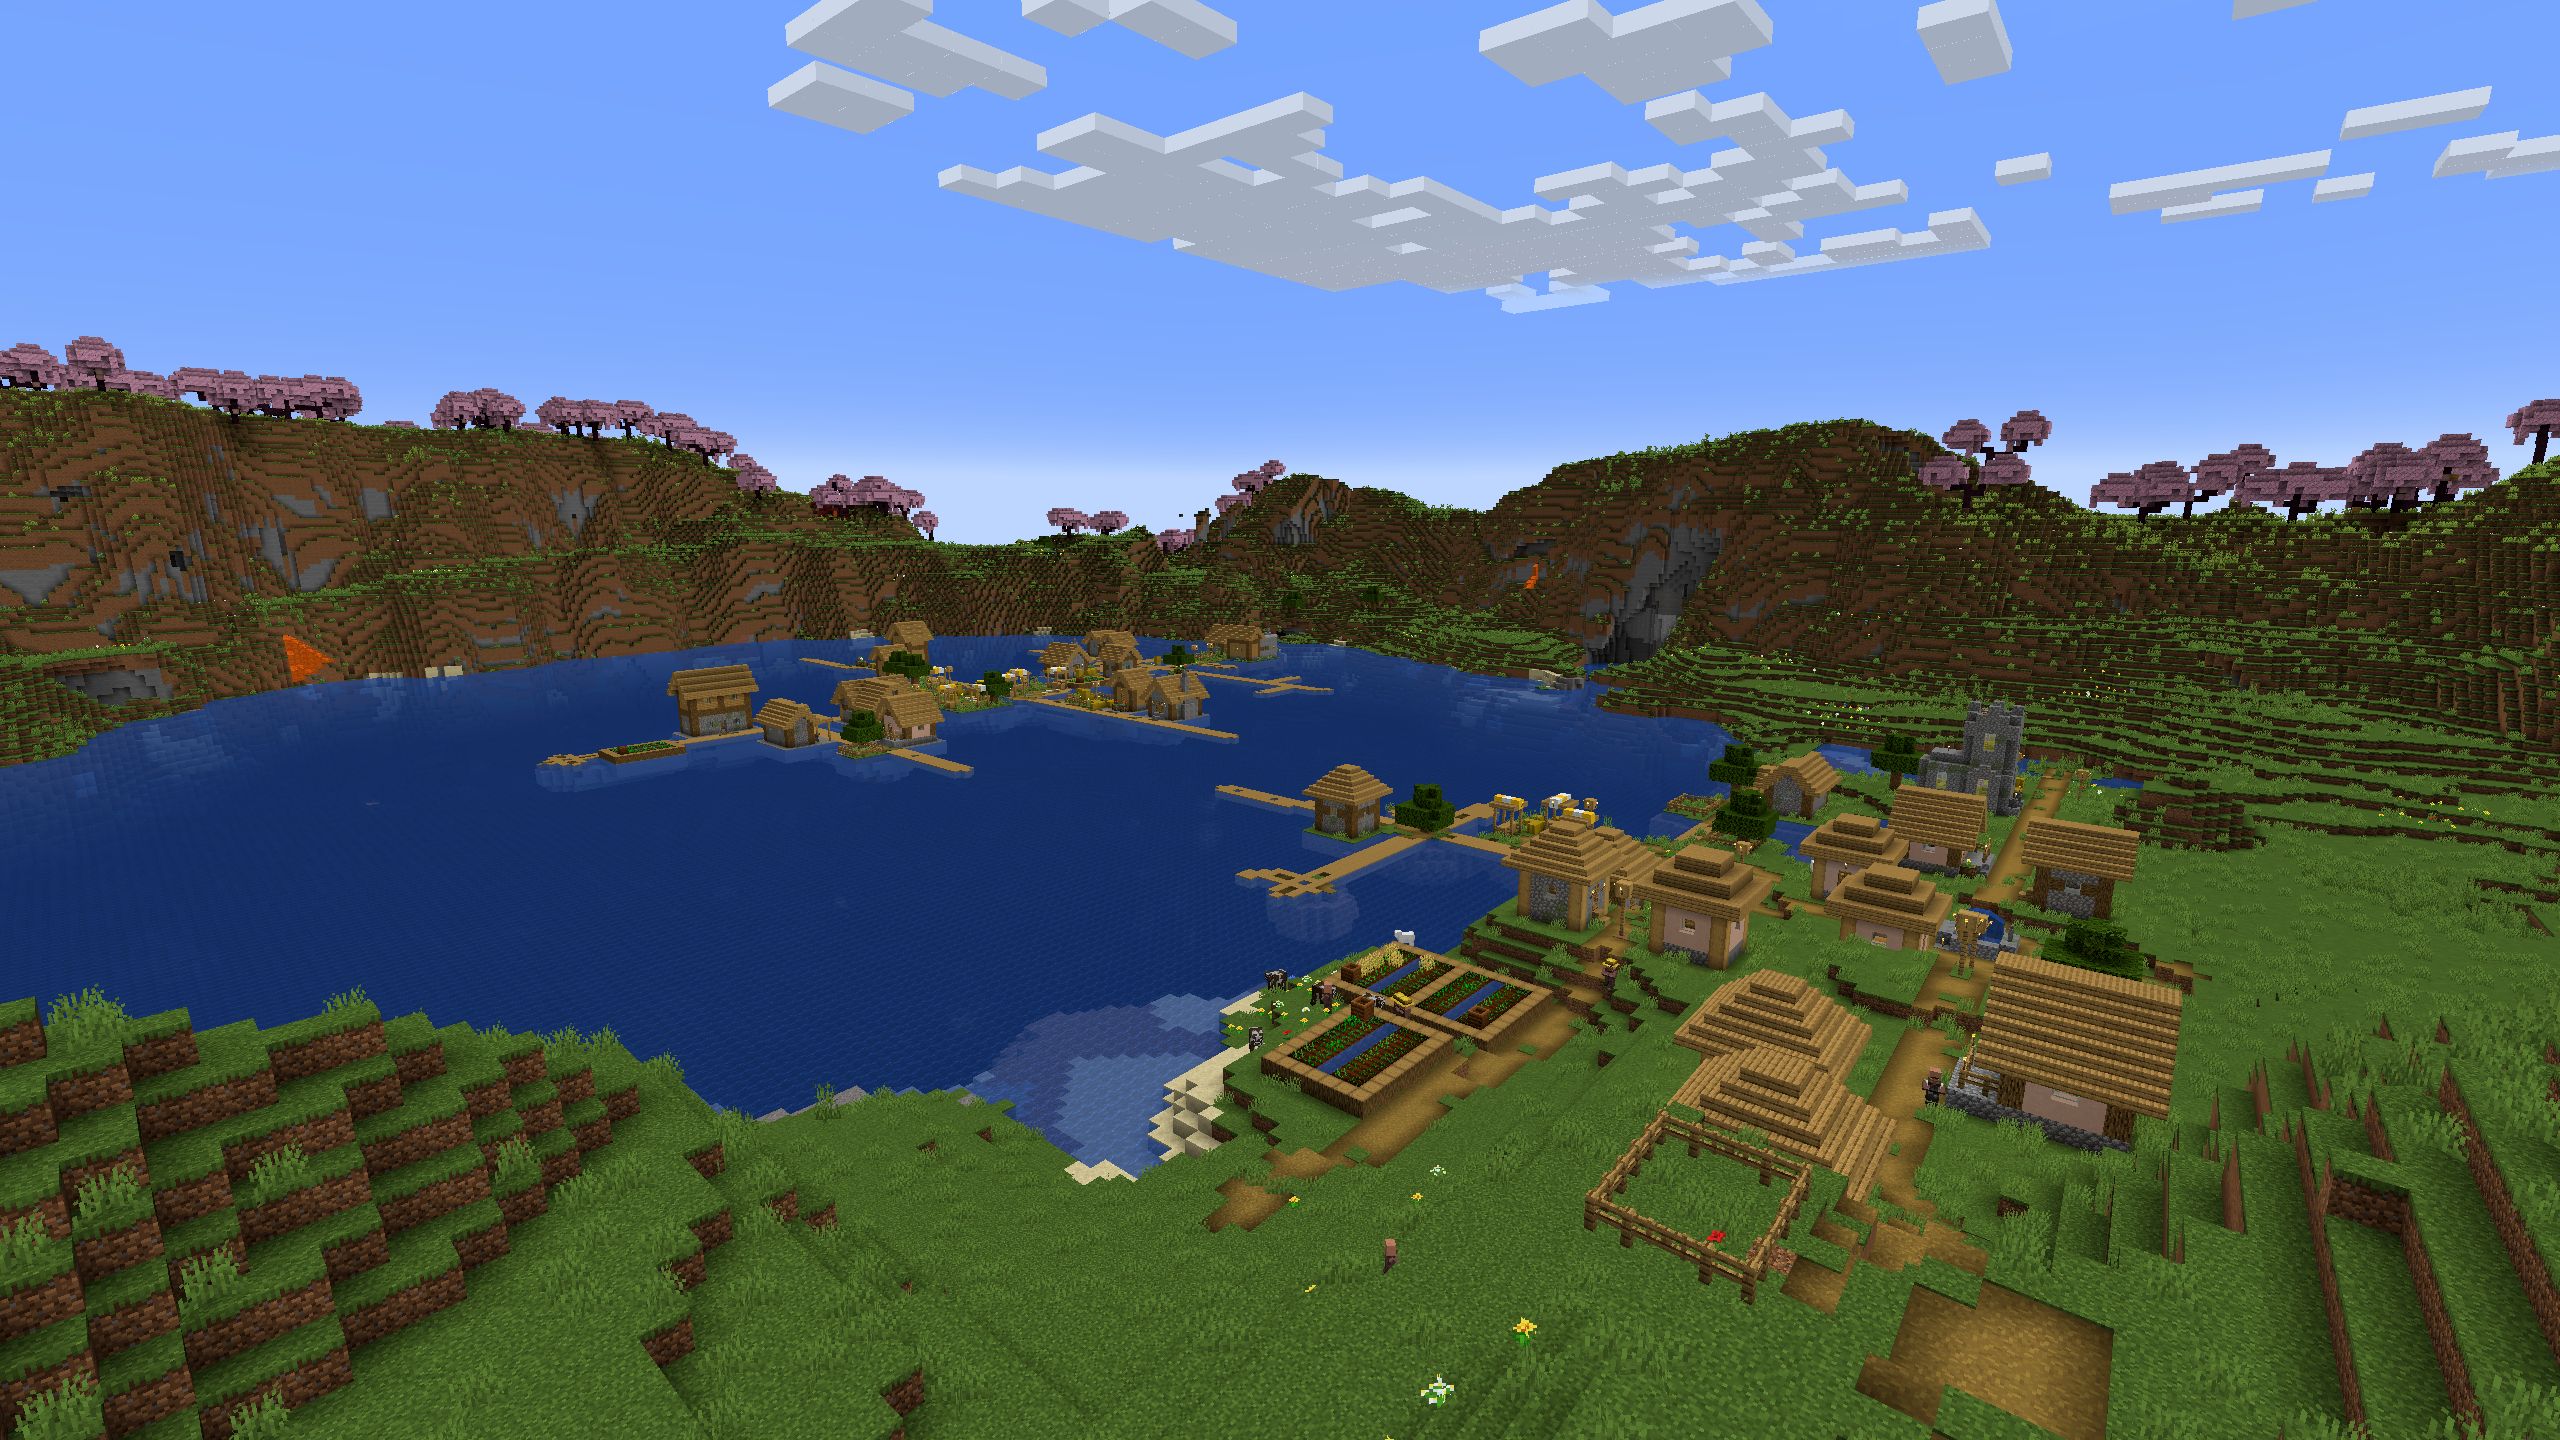 Minecraft Java Edition Two Villages On Deep Lake Surrounded By Cherry Blossom Trees